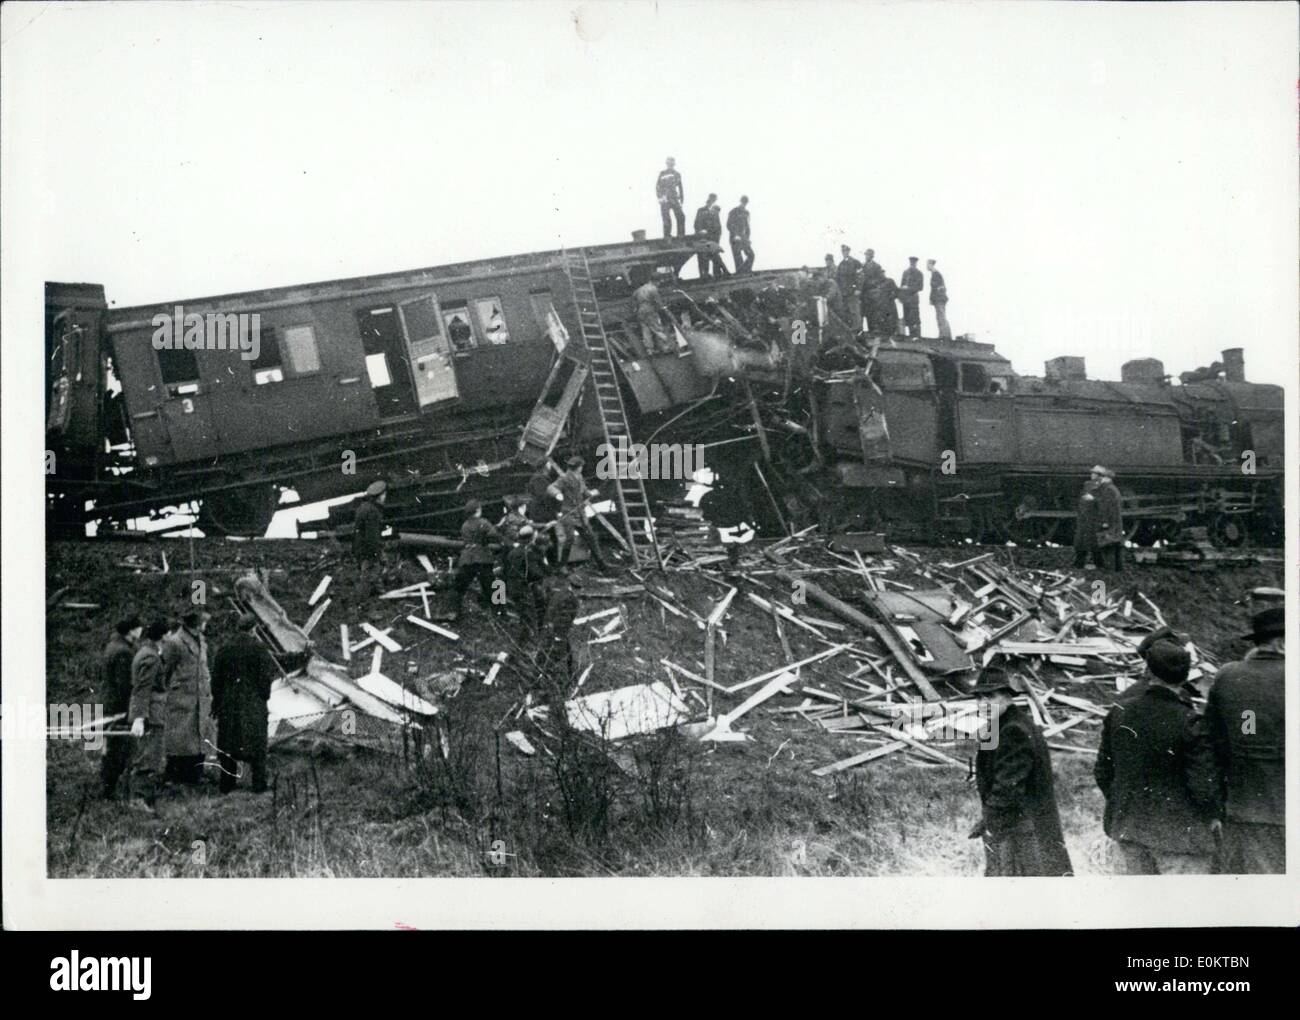 Jan. 26, 1951 - A most unfortunate railway accident occurred between Hamburg and B?chen as two trains collided in heavy fog. 4 people were killed, 3 severely injured, and the rest were helped out of the wreckage. Stock Photo